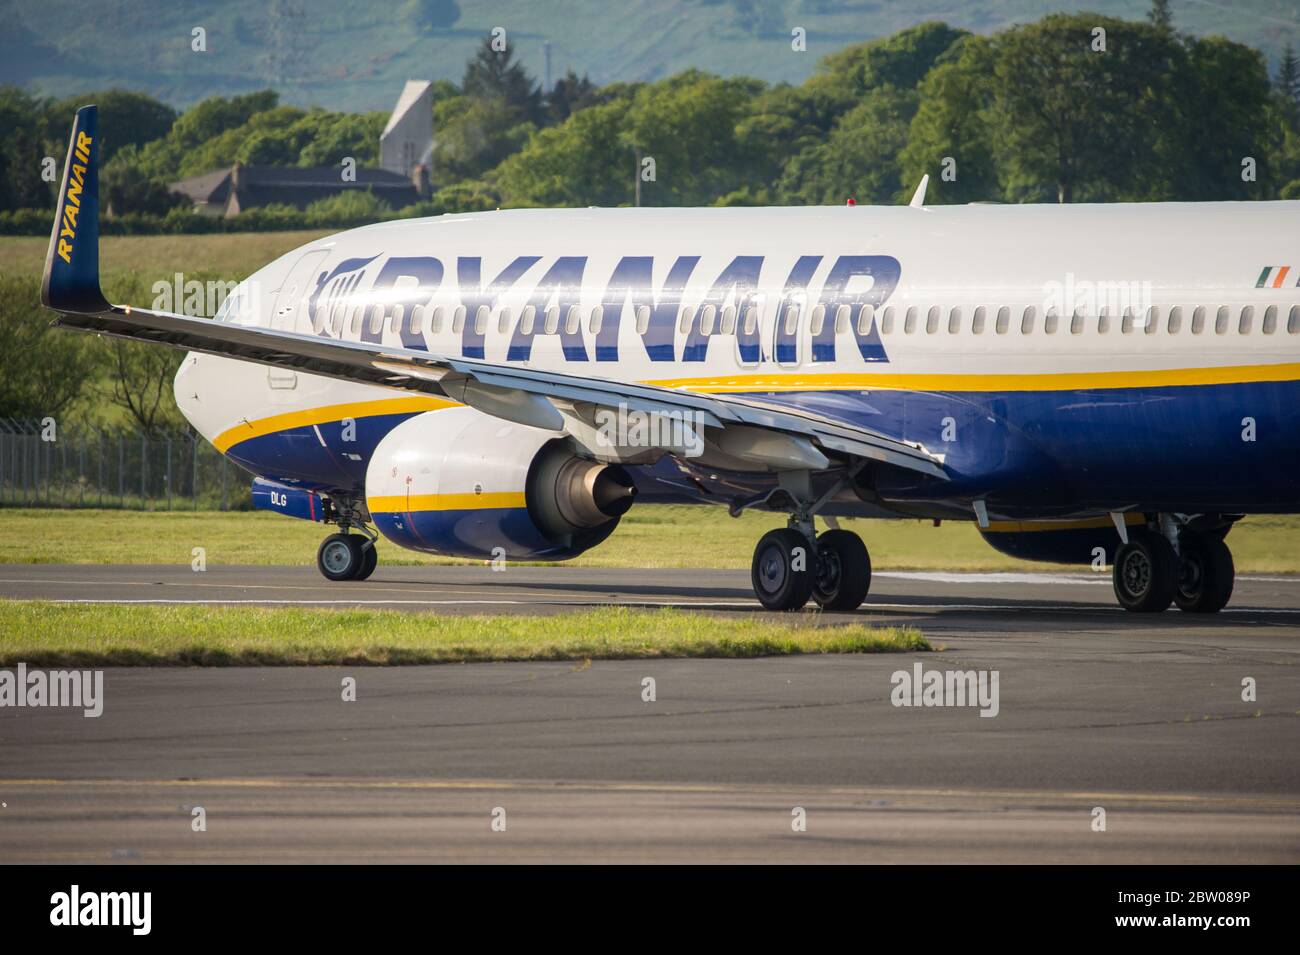 Glasgow, Scotland, UK. 28th May, 2020. Pictured: Ryanair flight seen  departing Glasgow International Airport. Ryanair is the reportedly still  owing refunds to around 80% of their passengers who claimed money back  during